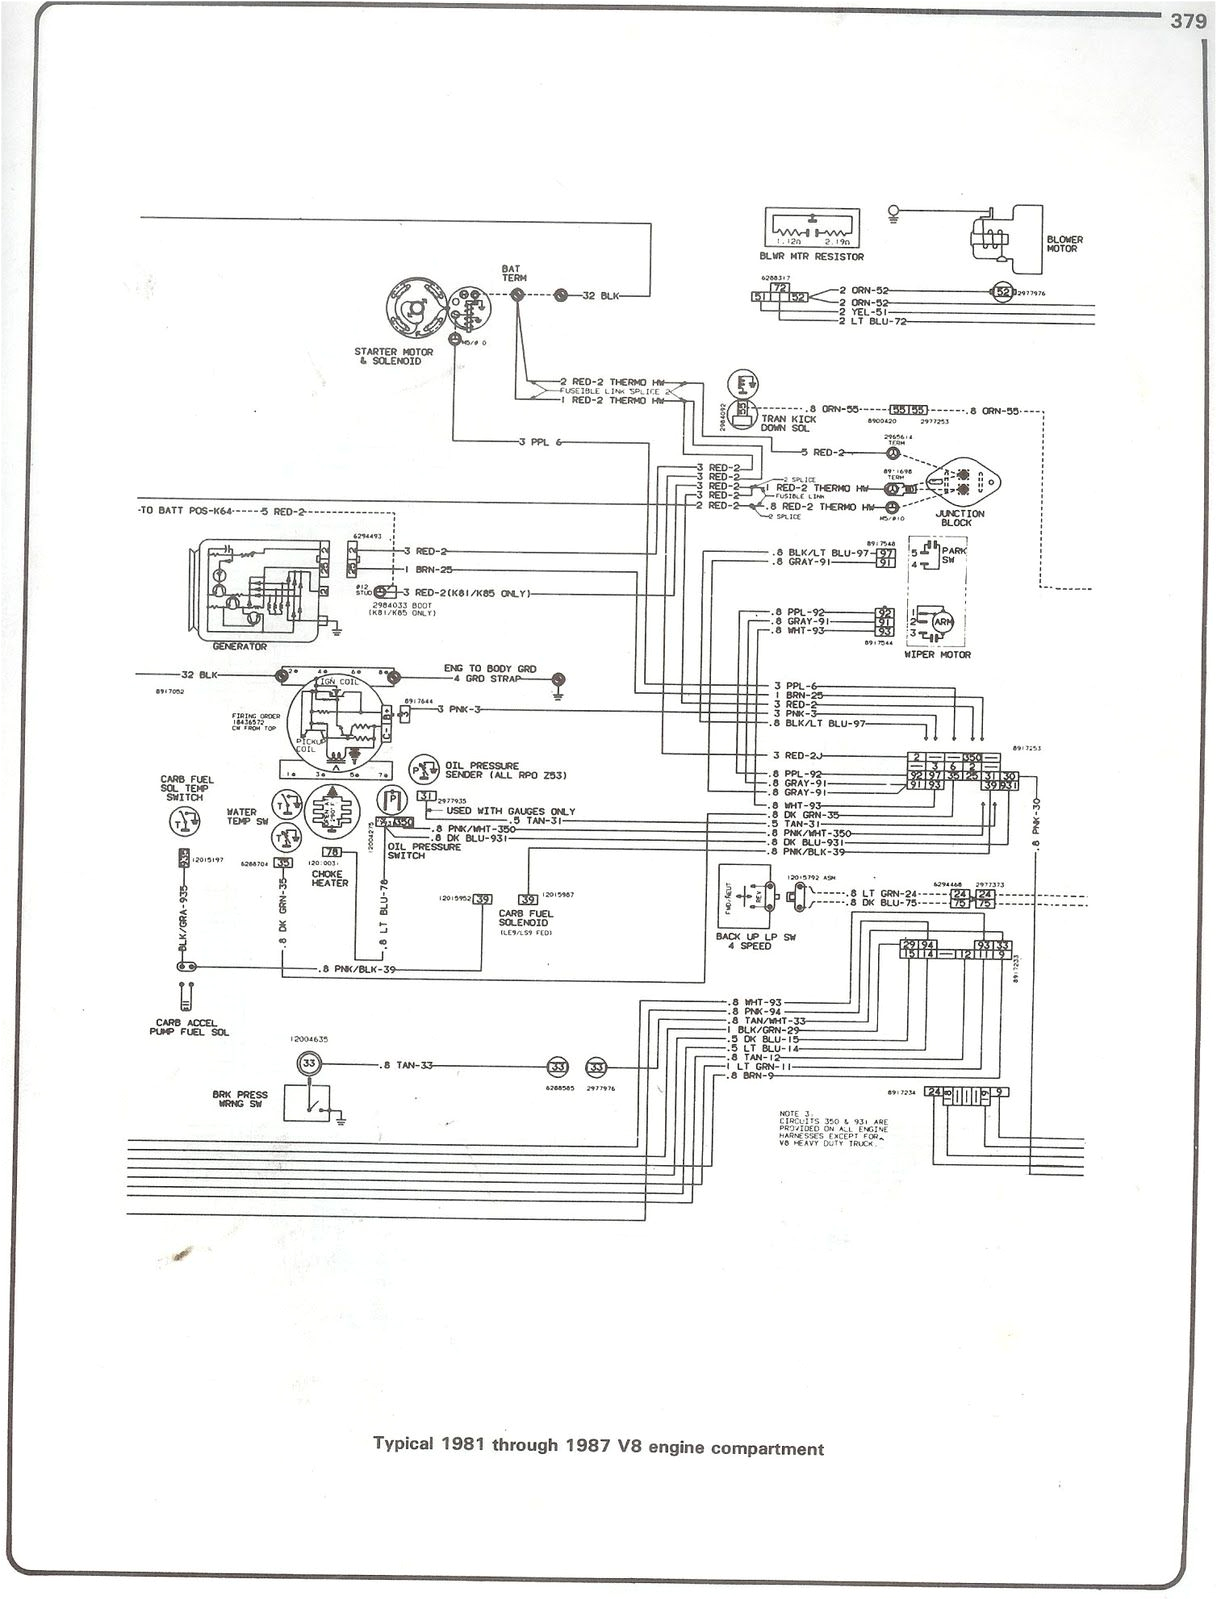 87 chevy silverado wiring get wiring diagram mix this is engine compartment wiring diagram for 1981